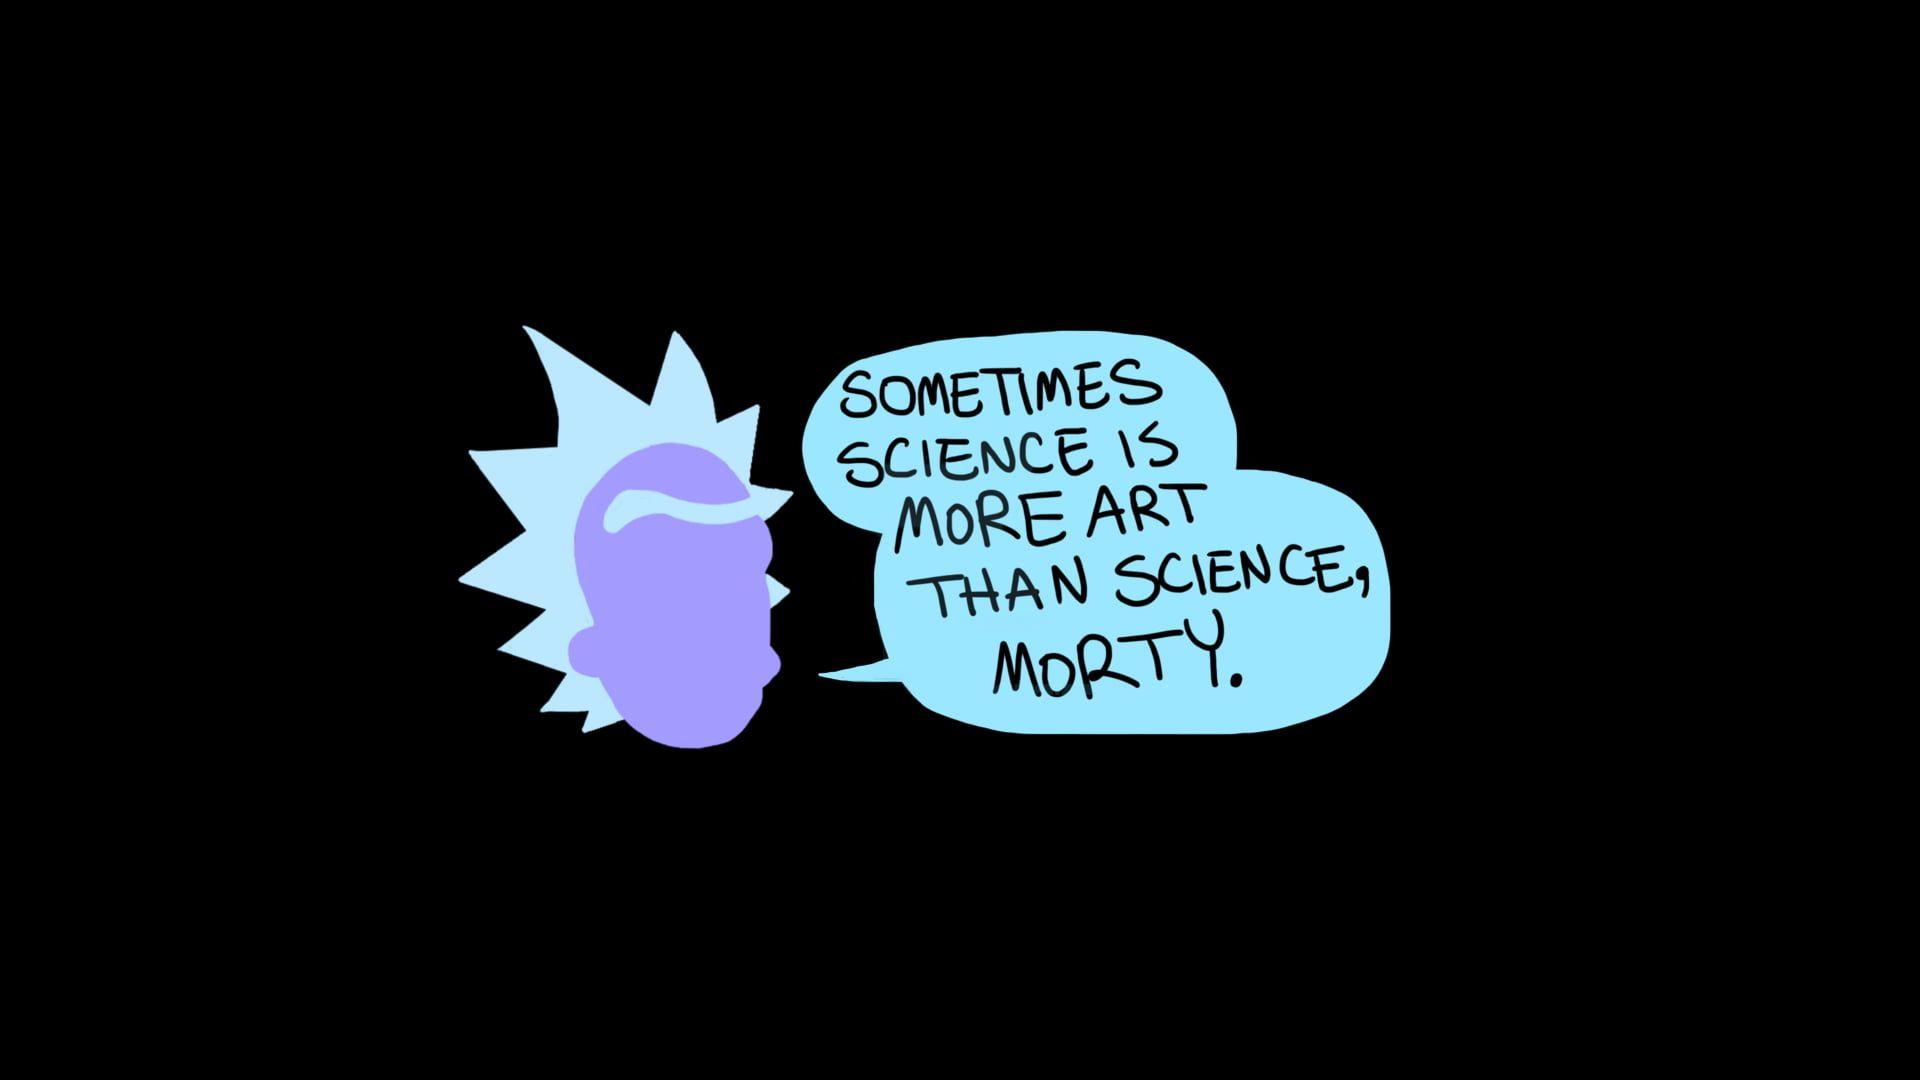 Sometimes science is more art than science Morty